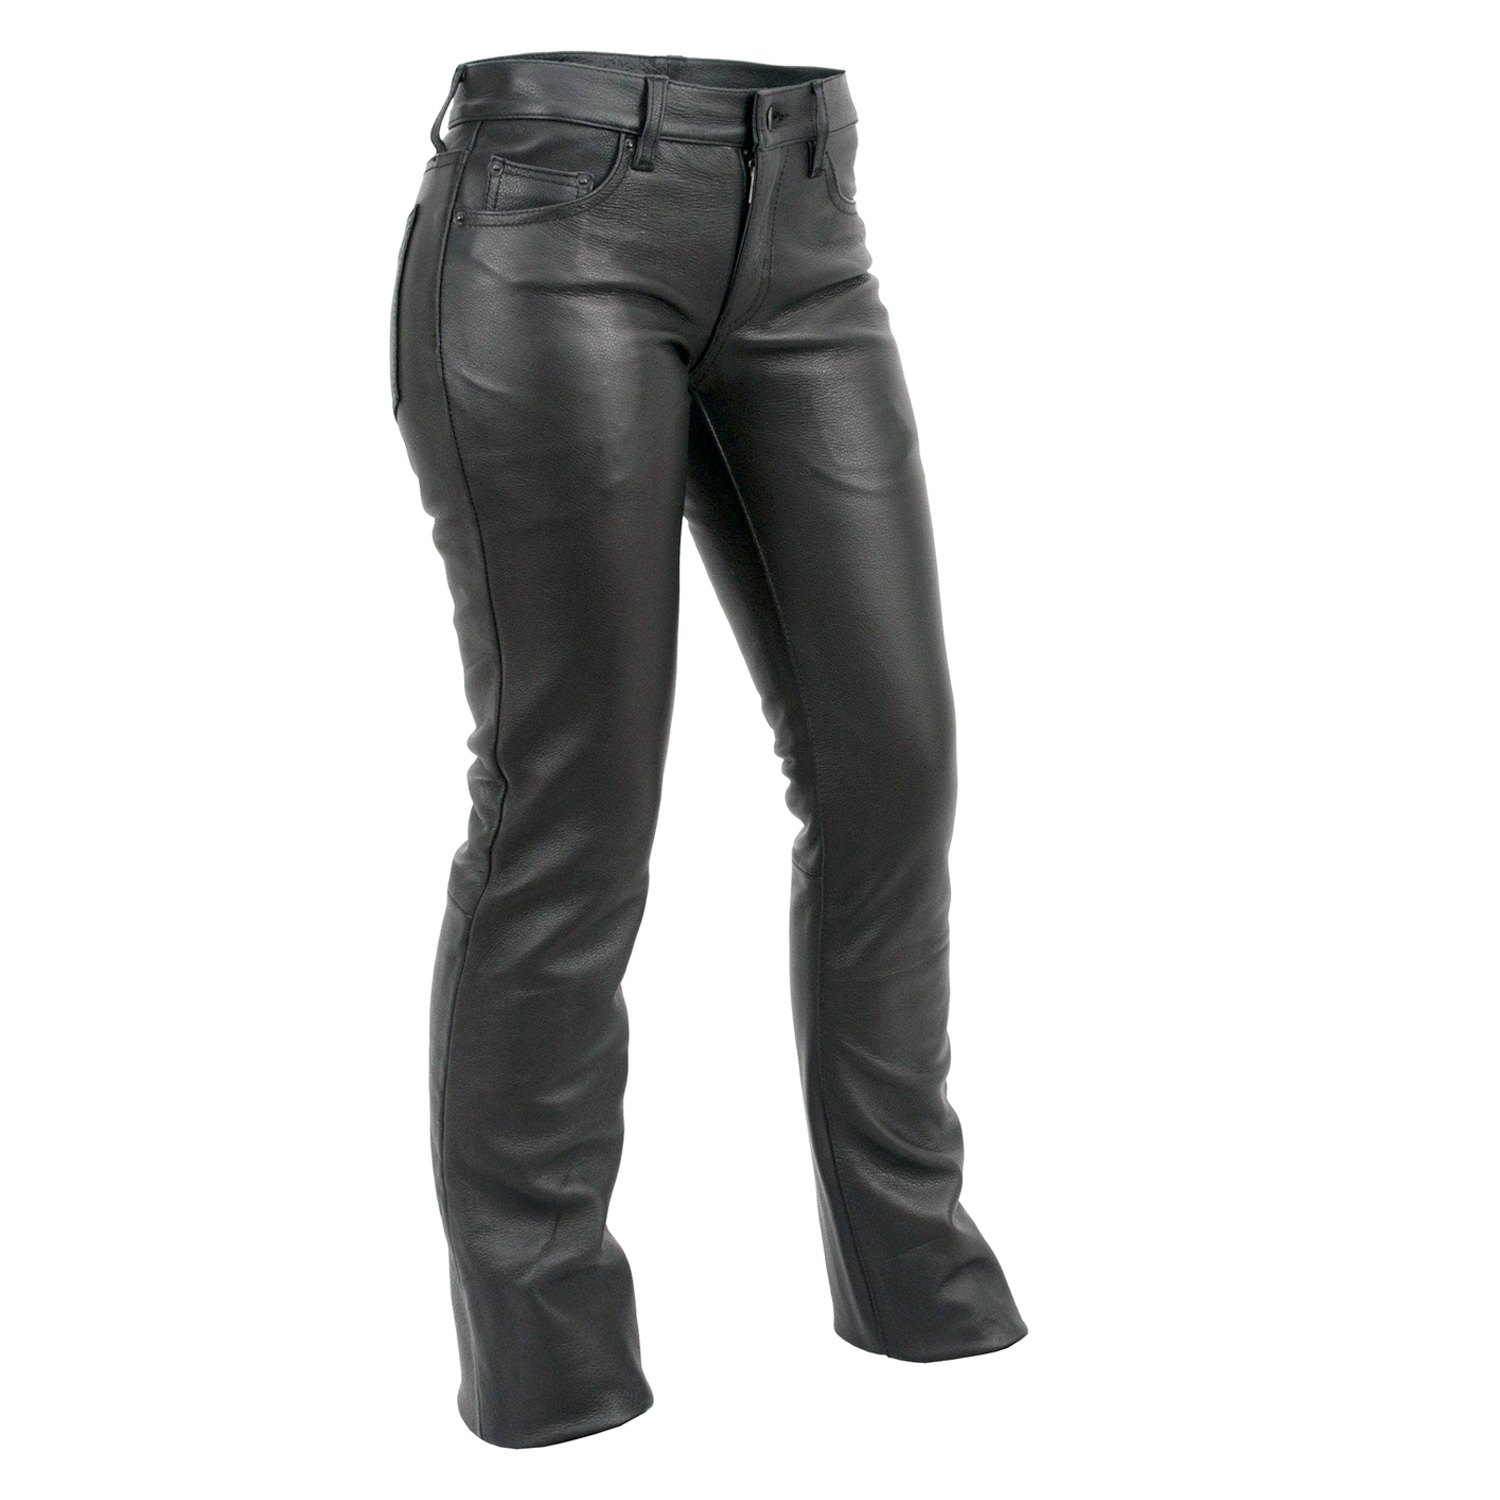 Women's Leather Motorcycle Pants - 5 Pocket Jean Style - Alexis